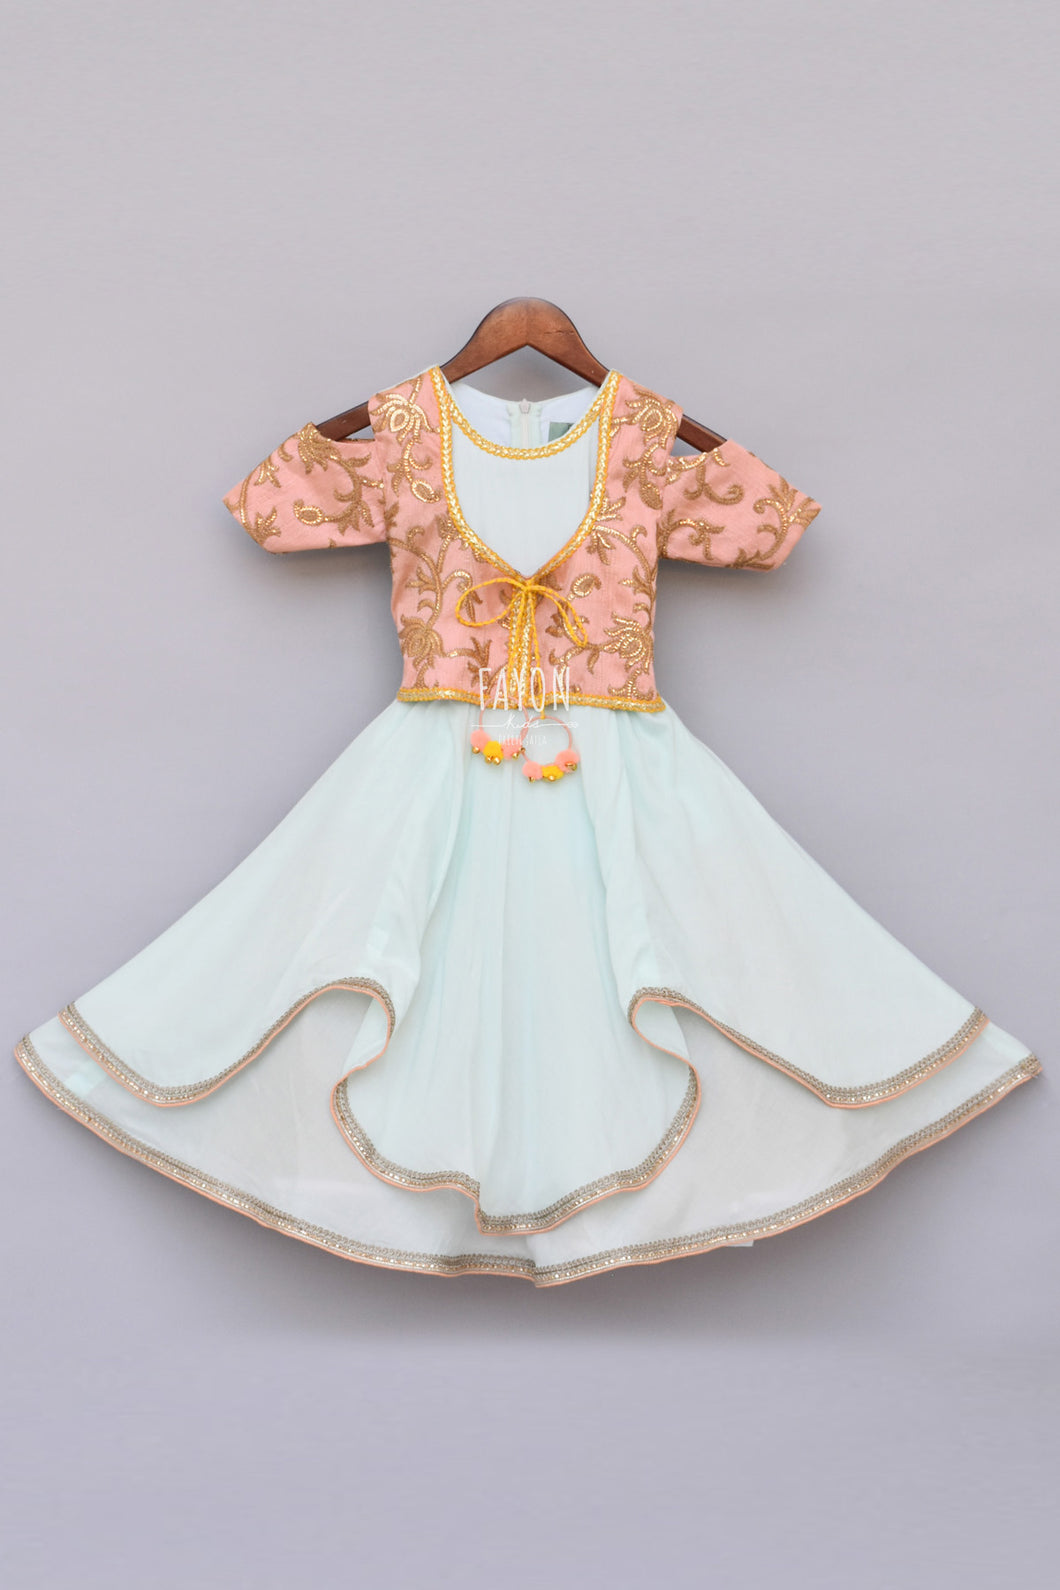 Girls Light Blue Anarkali Dress With Attached Embroidery Jacket